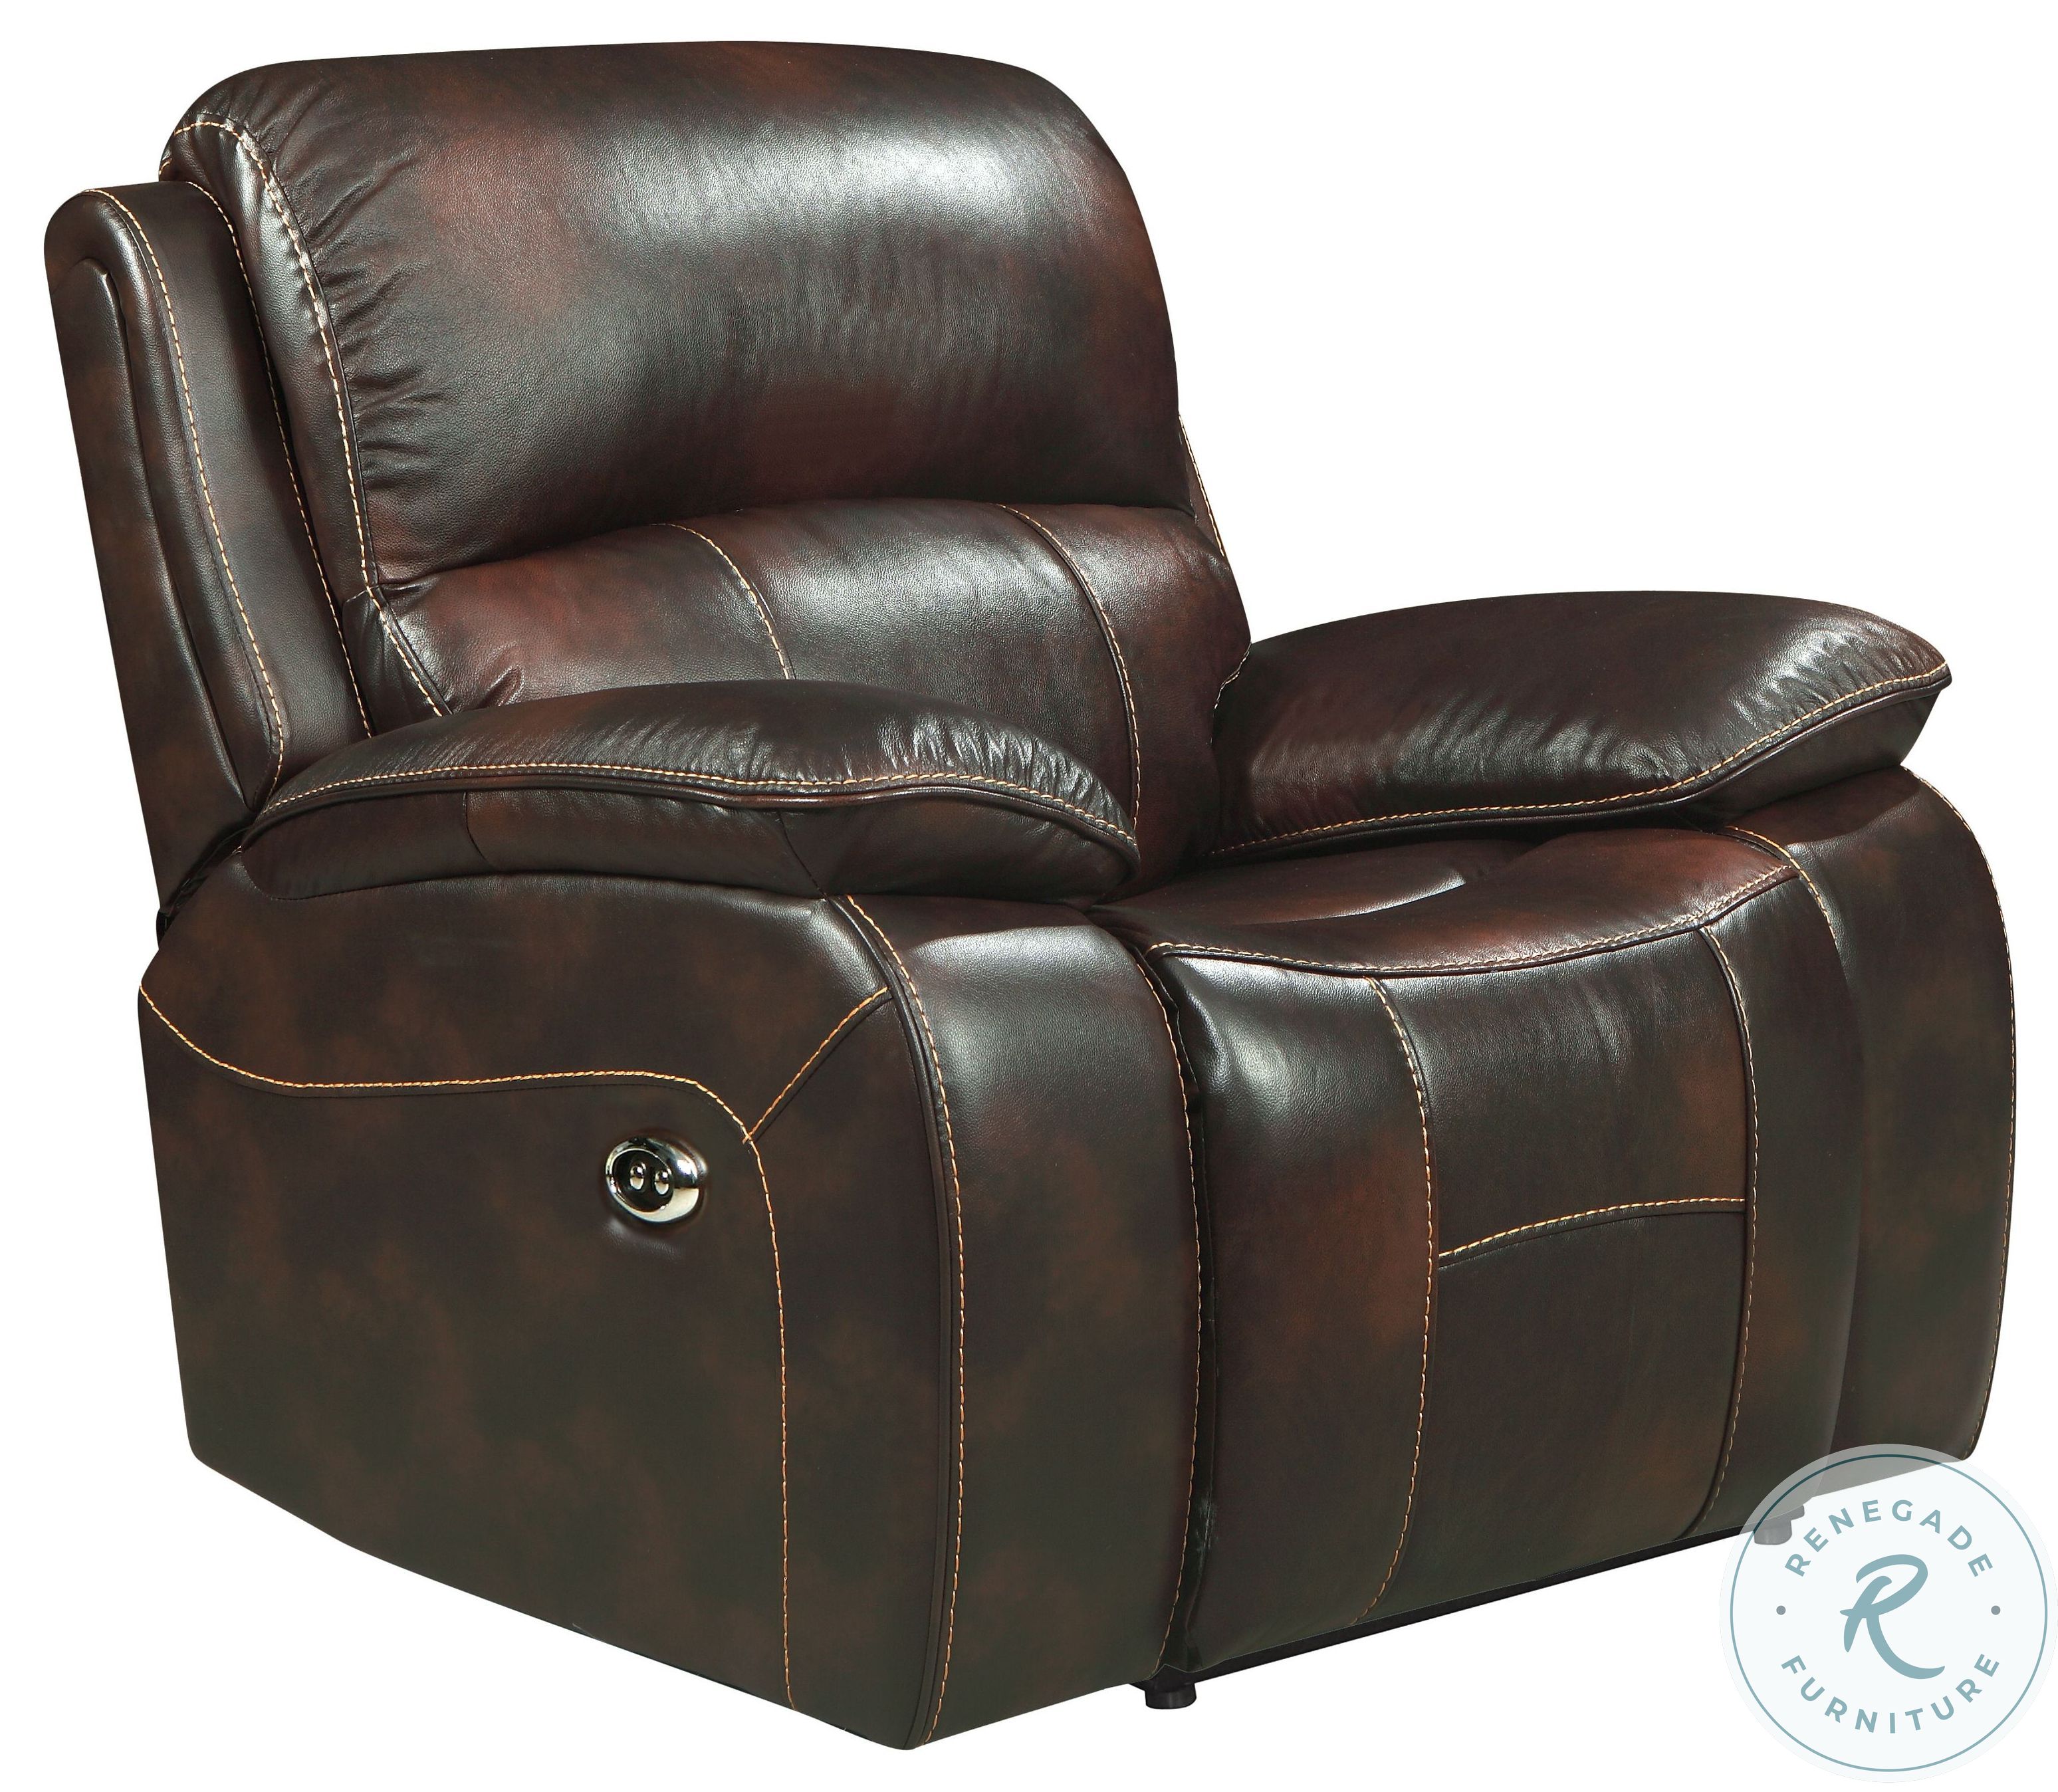 Mahala Brown Power Reclining Chair From, Dark Brown Real Leather Recliner Chair